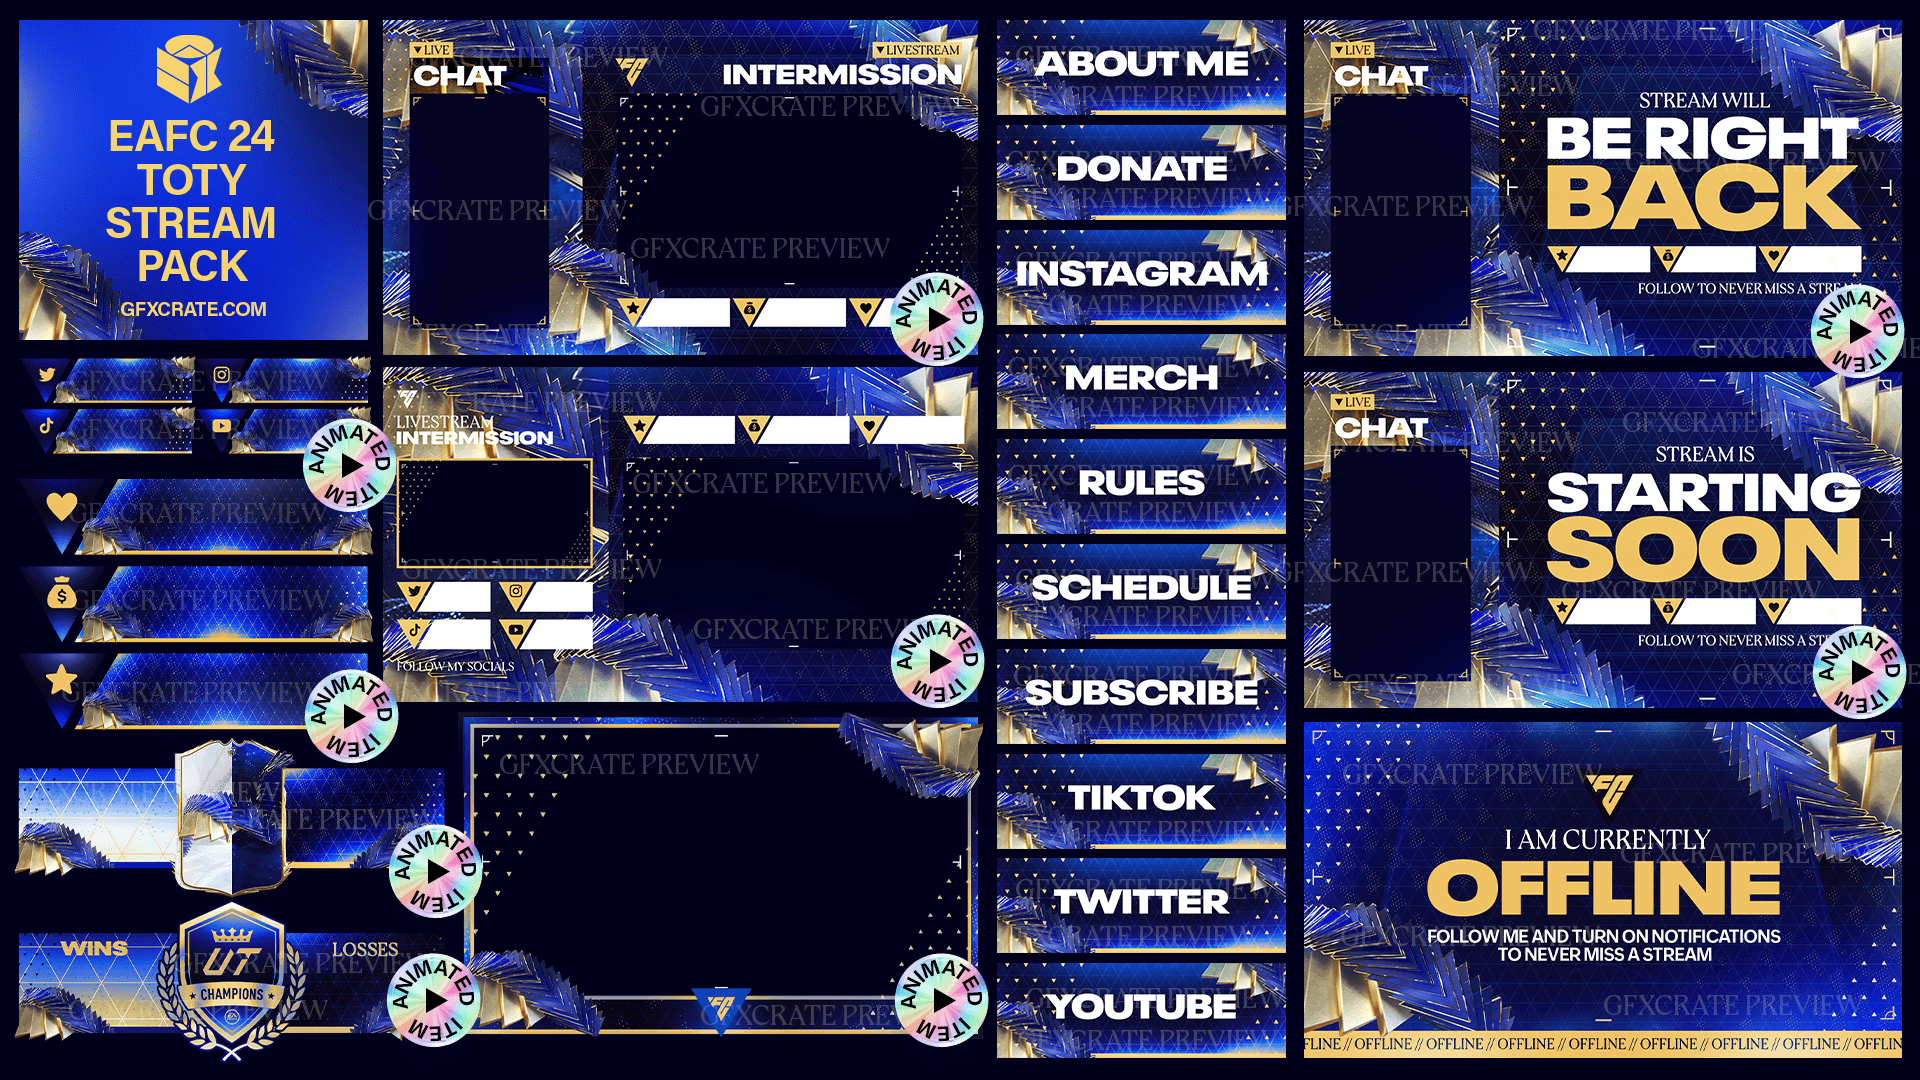 FC 24 Team of the Year Animated Livestream Overlay Pack (for Twitch, YouTube, Kick etc.) (FIFA 24) - GFXCRATE